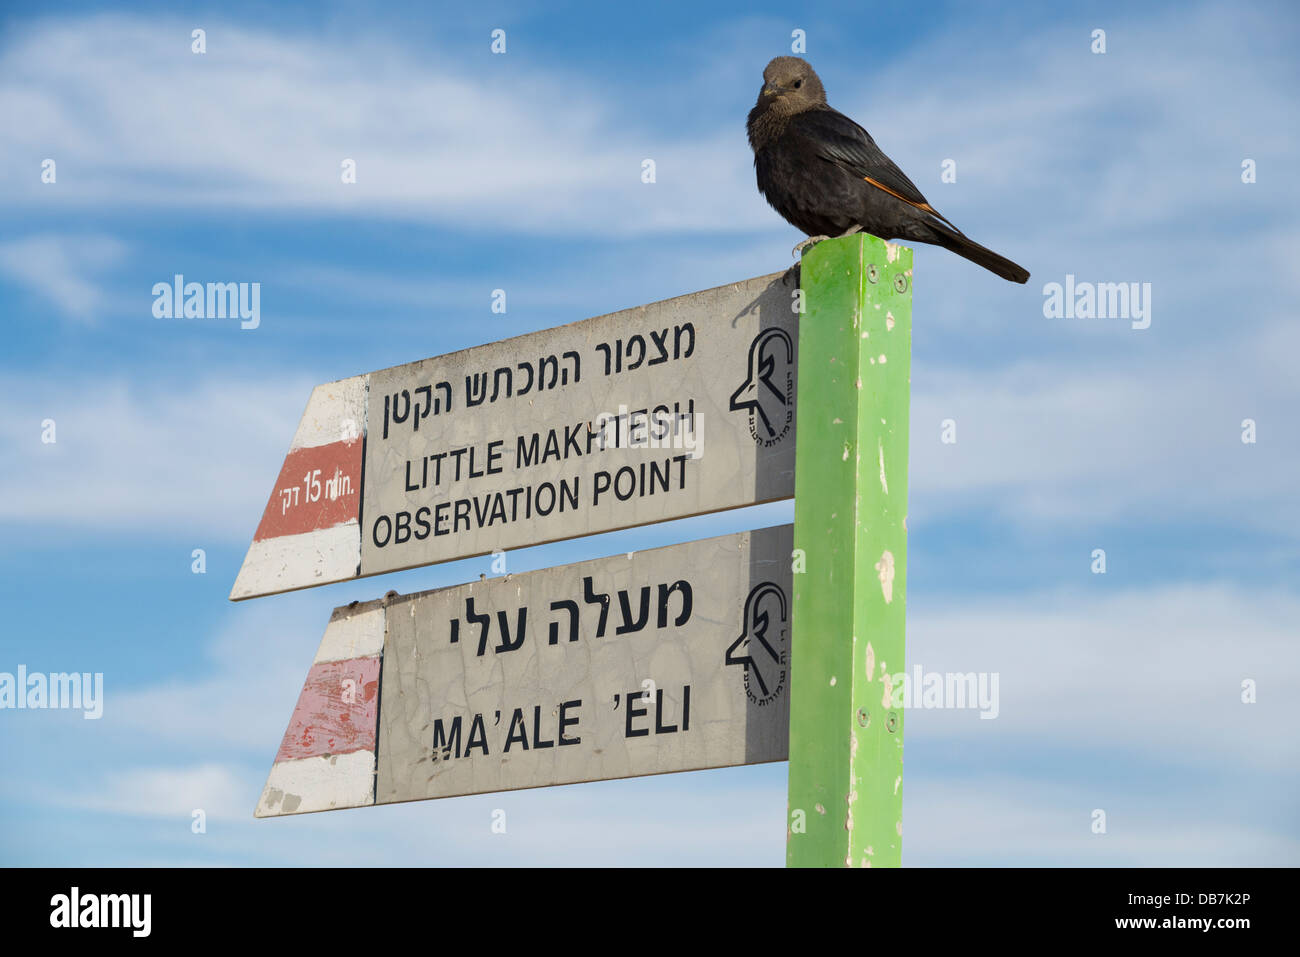 Bird perched on a hiking sign. Negev desert. Israel. Stock Photo